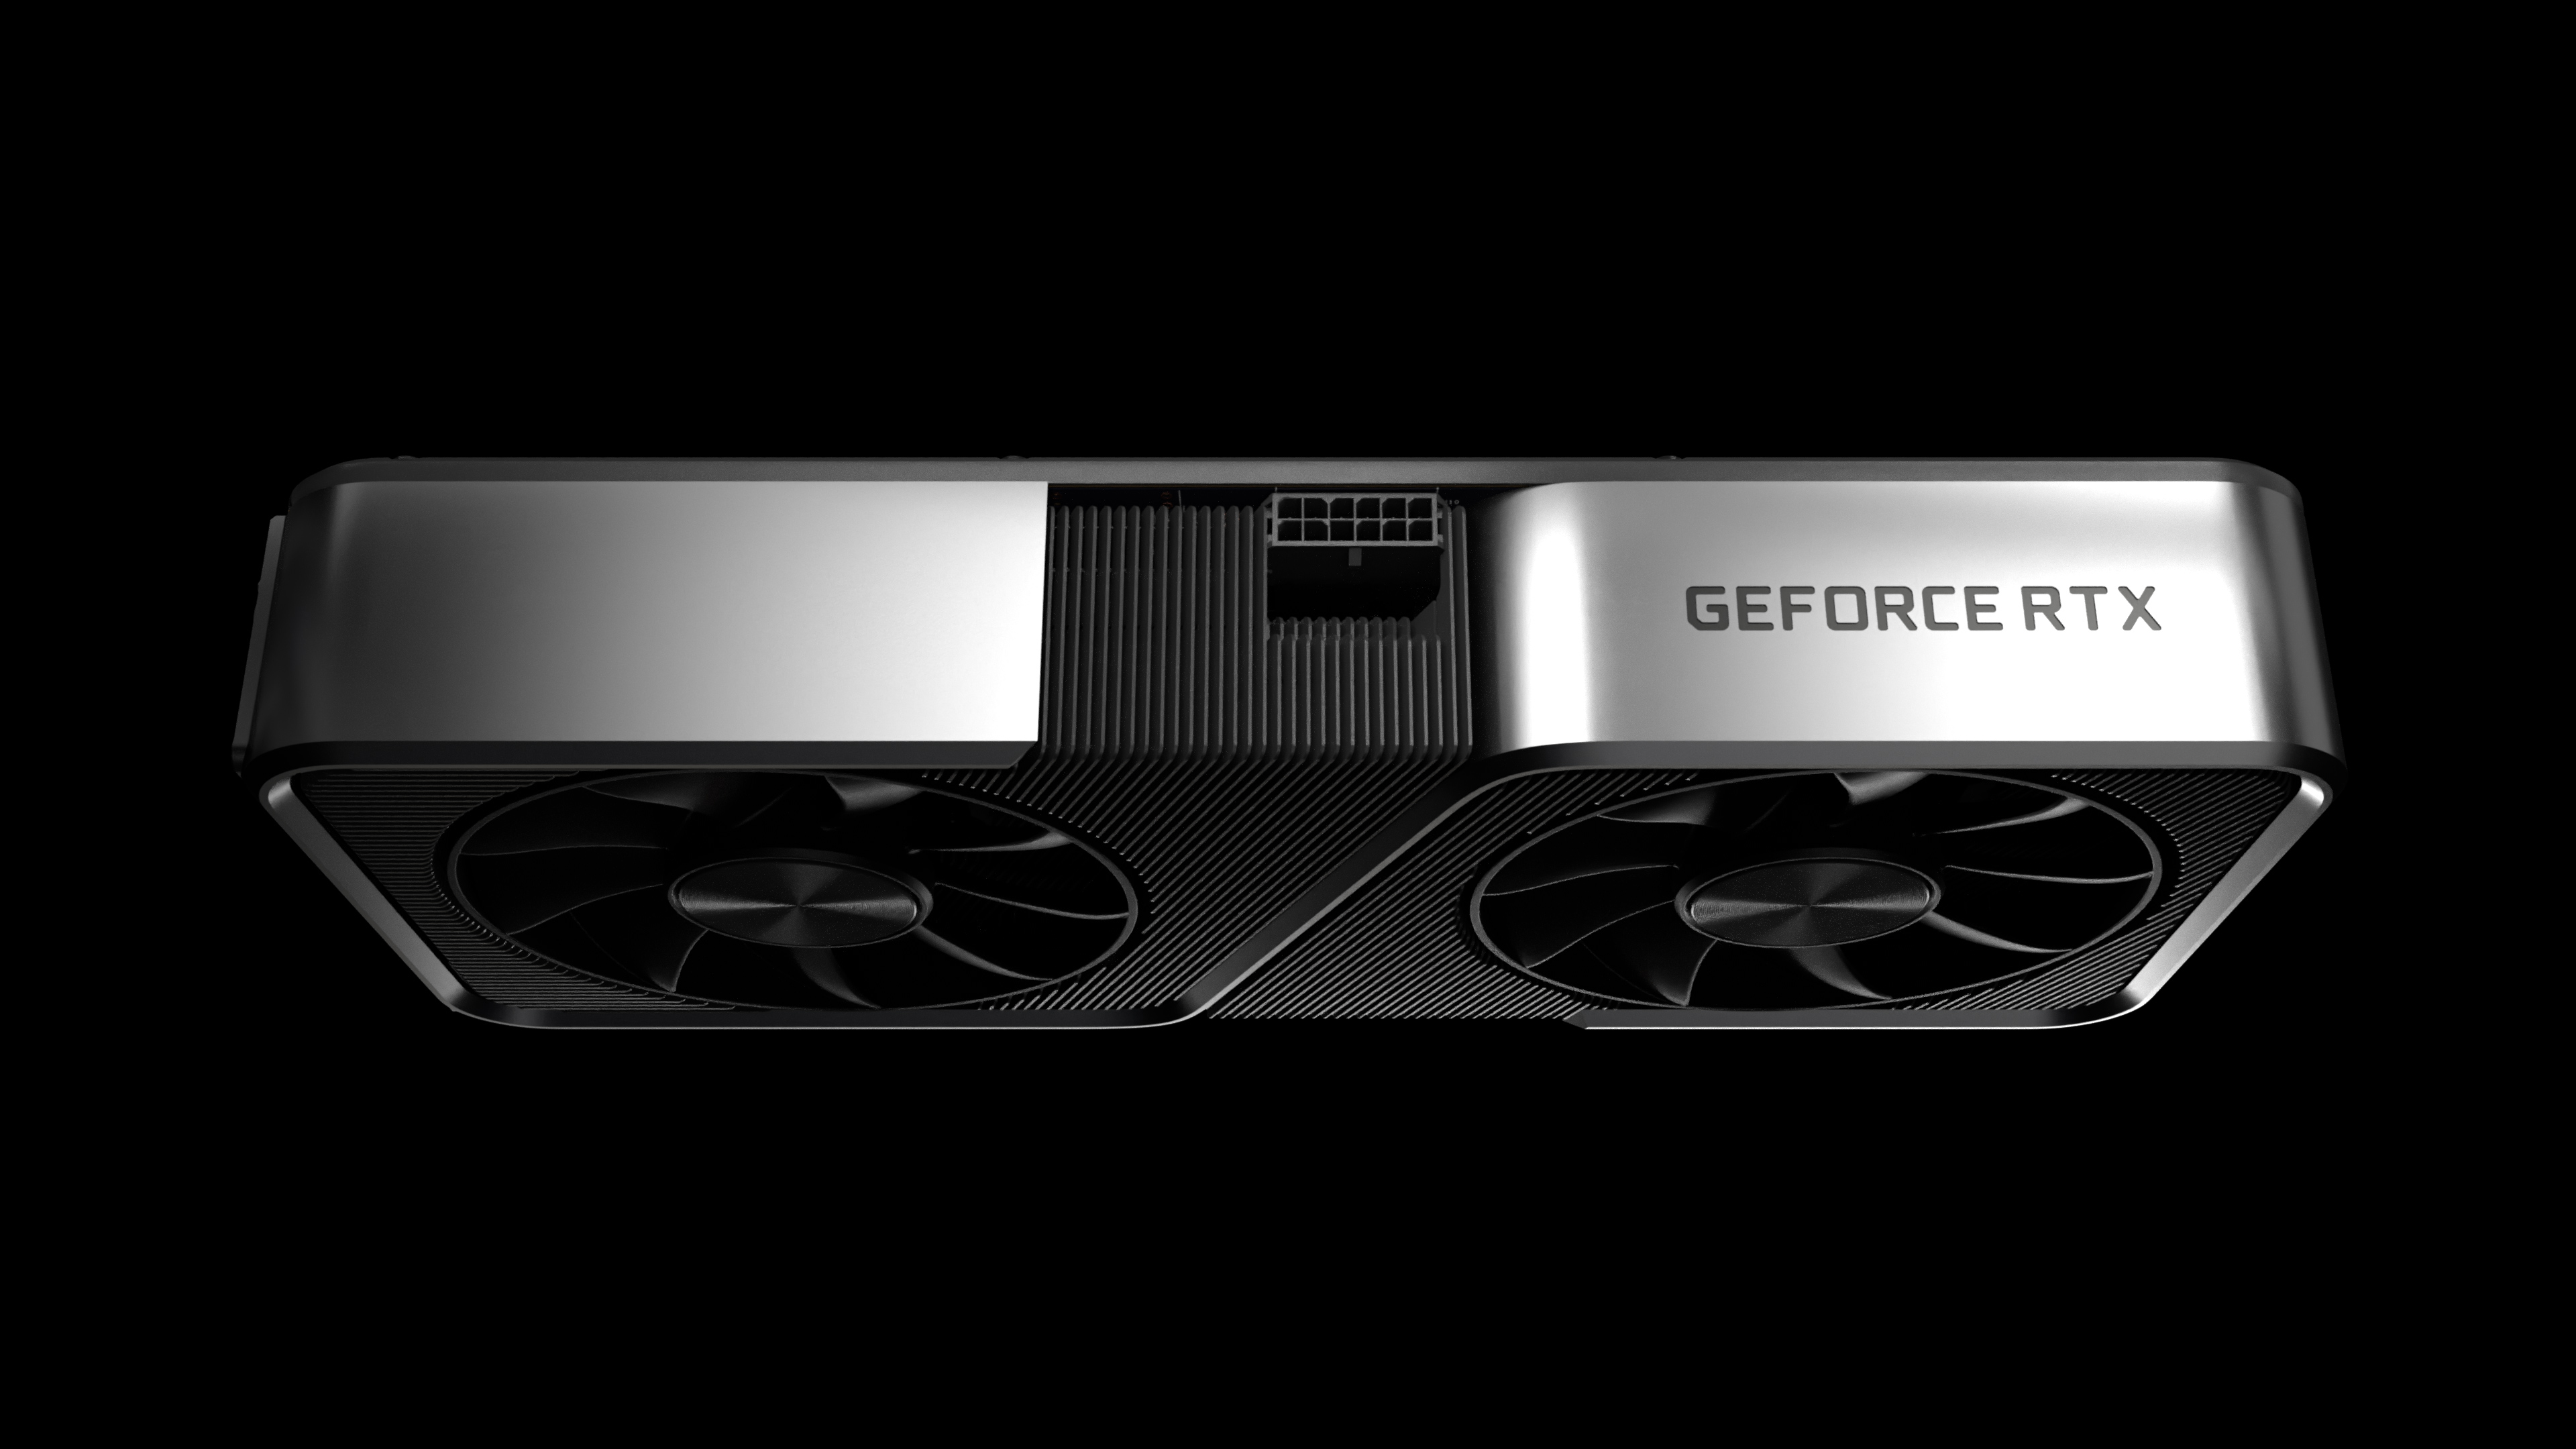 The NVIDIA GeForce RTX 3070 Ti with 16 GB GDDR6 VRAM appears in a 